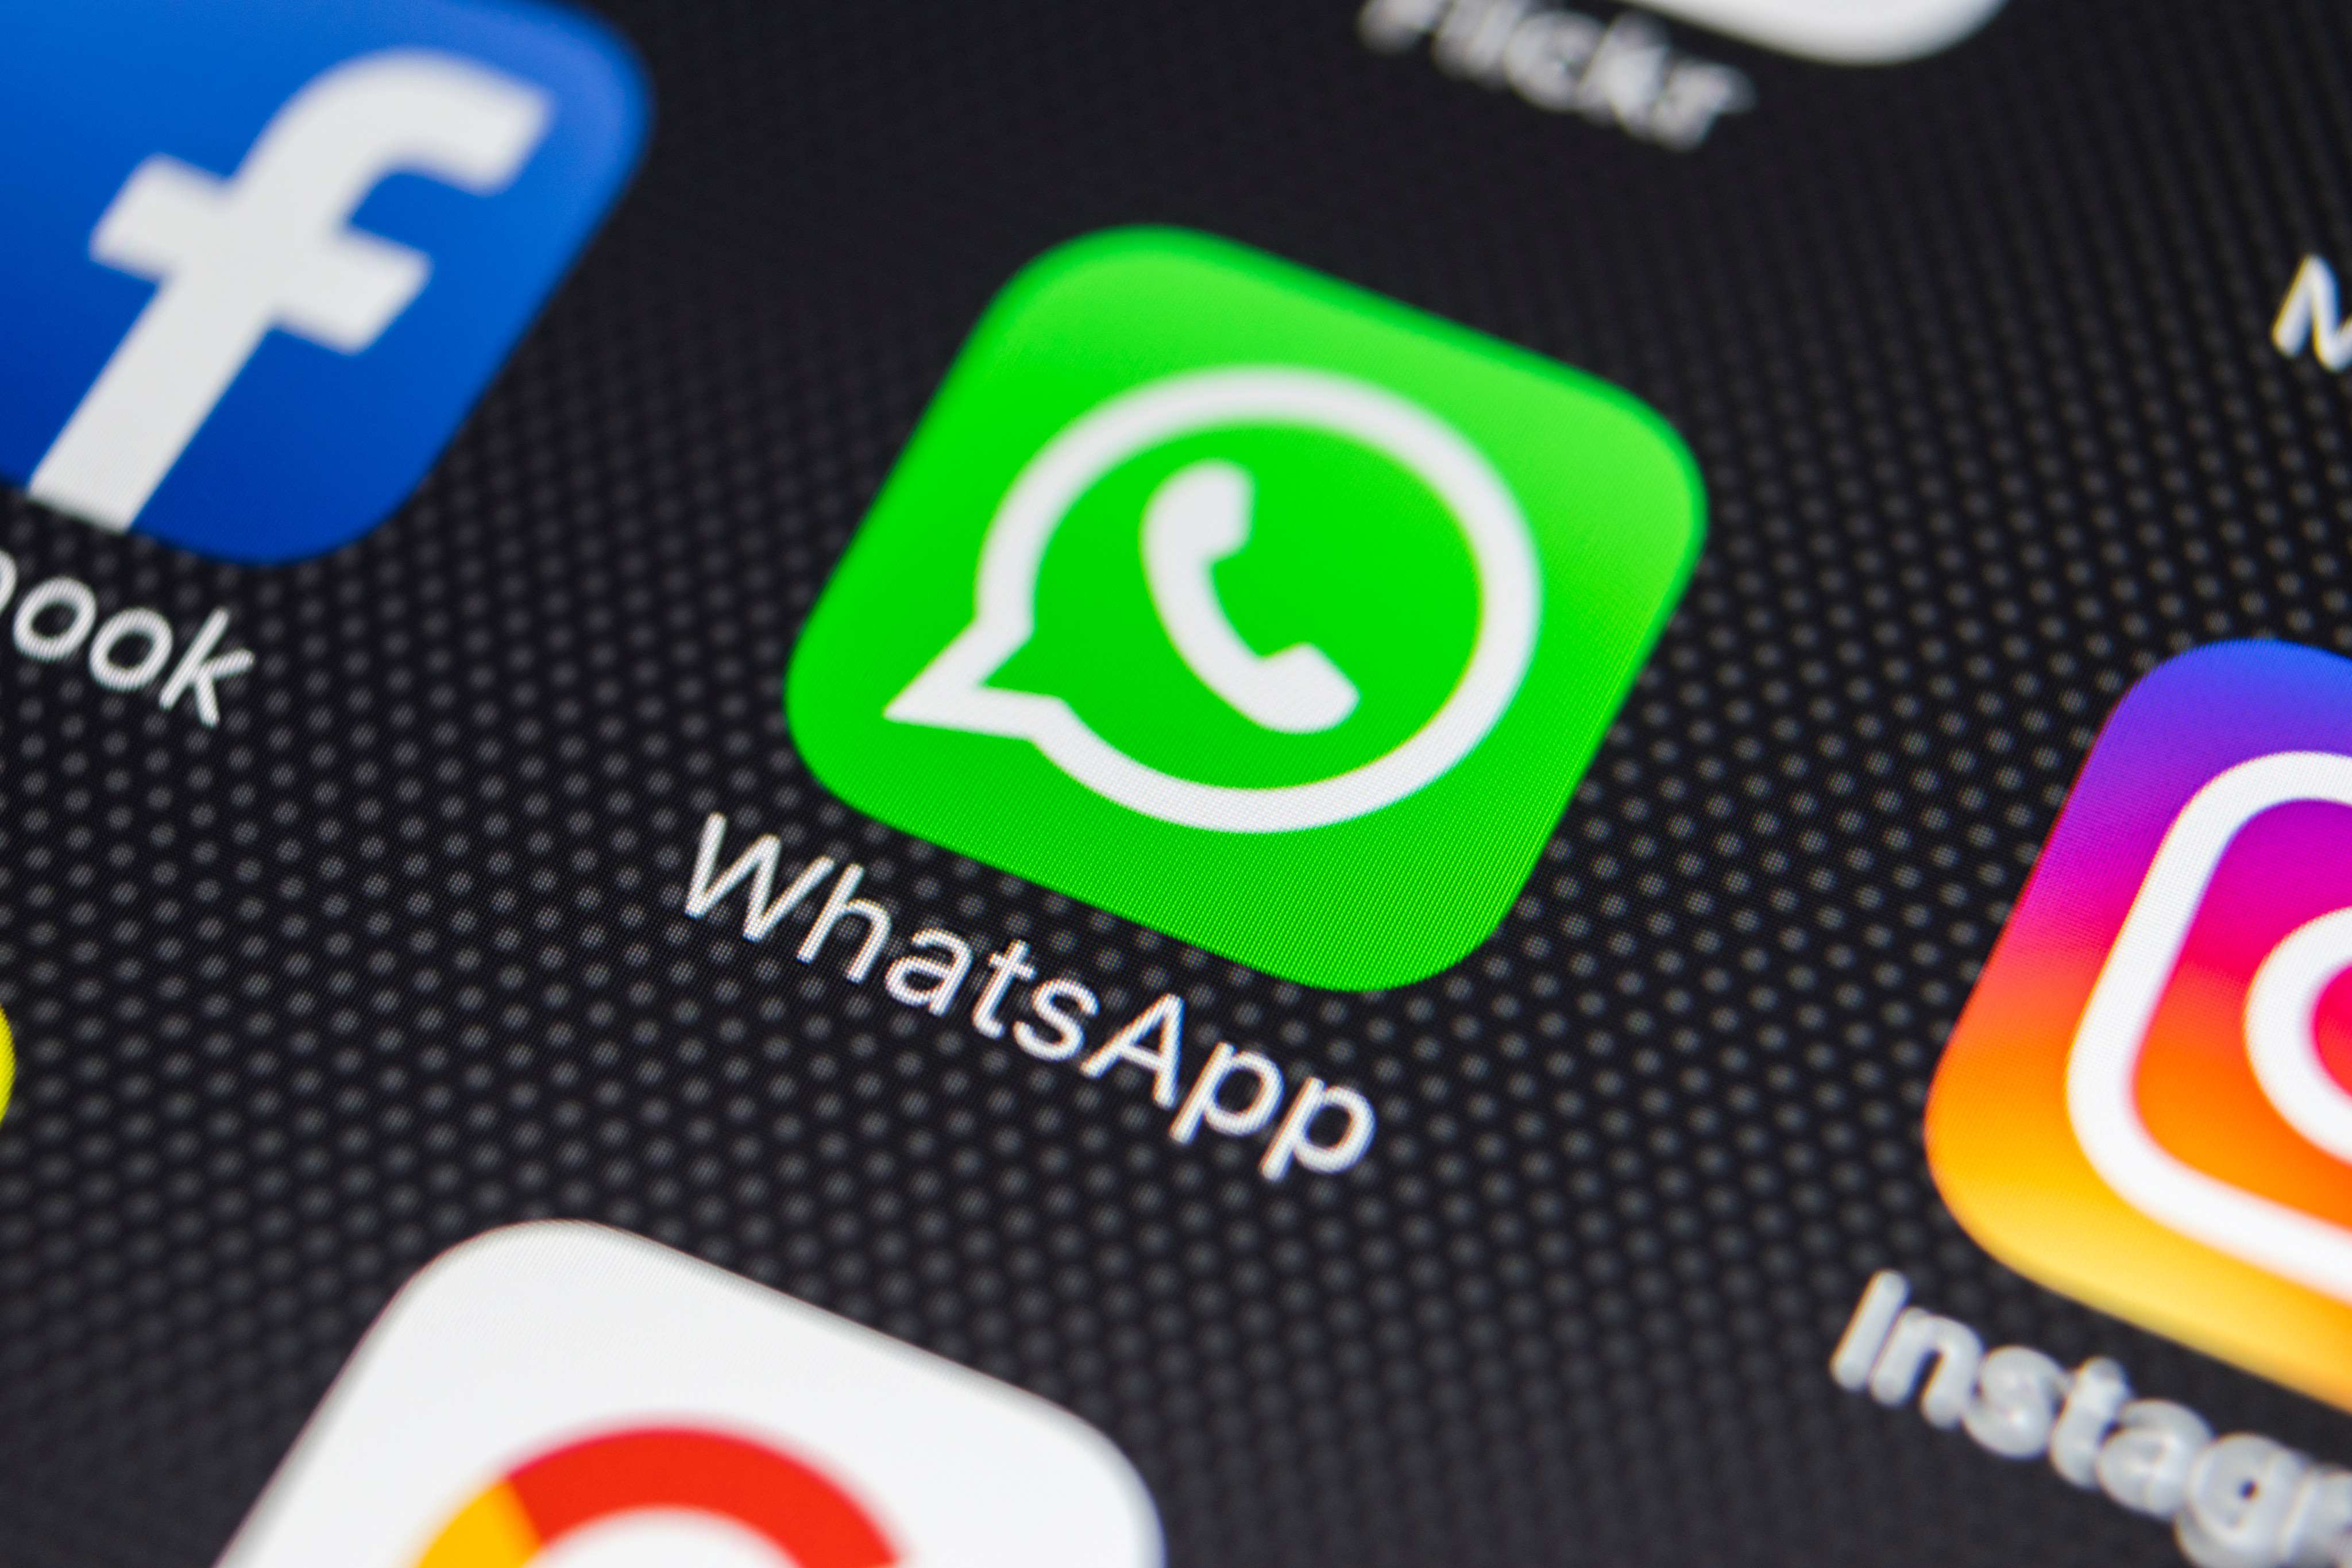 WhatsApp introduces new functions to its status updates. Photo: Shutterstock